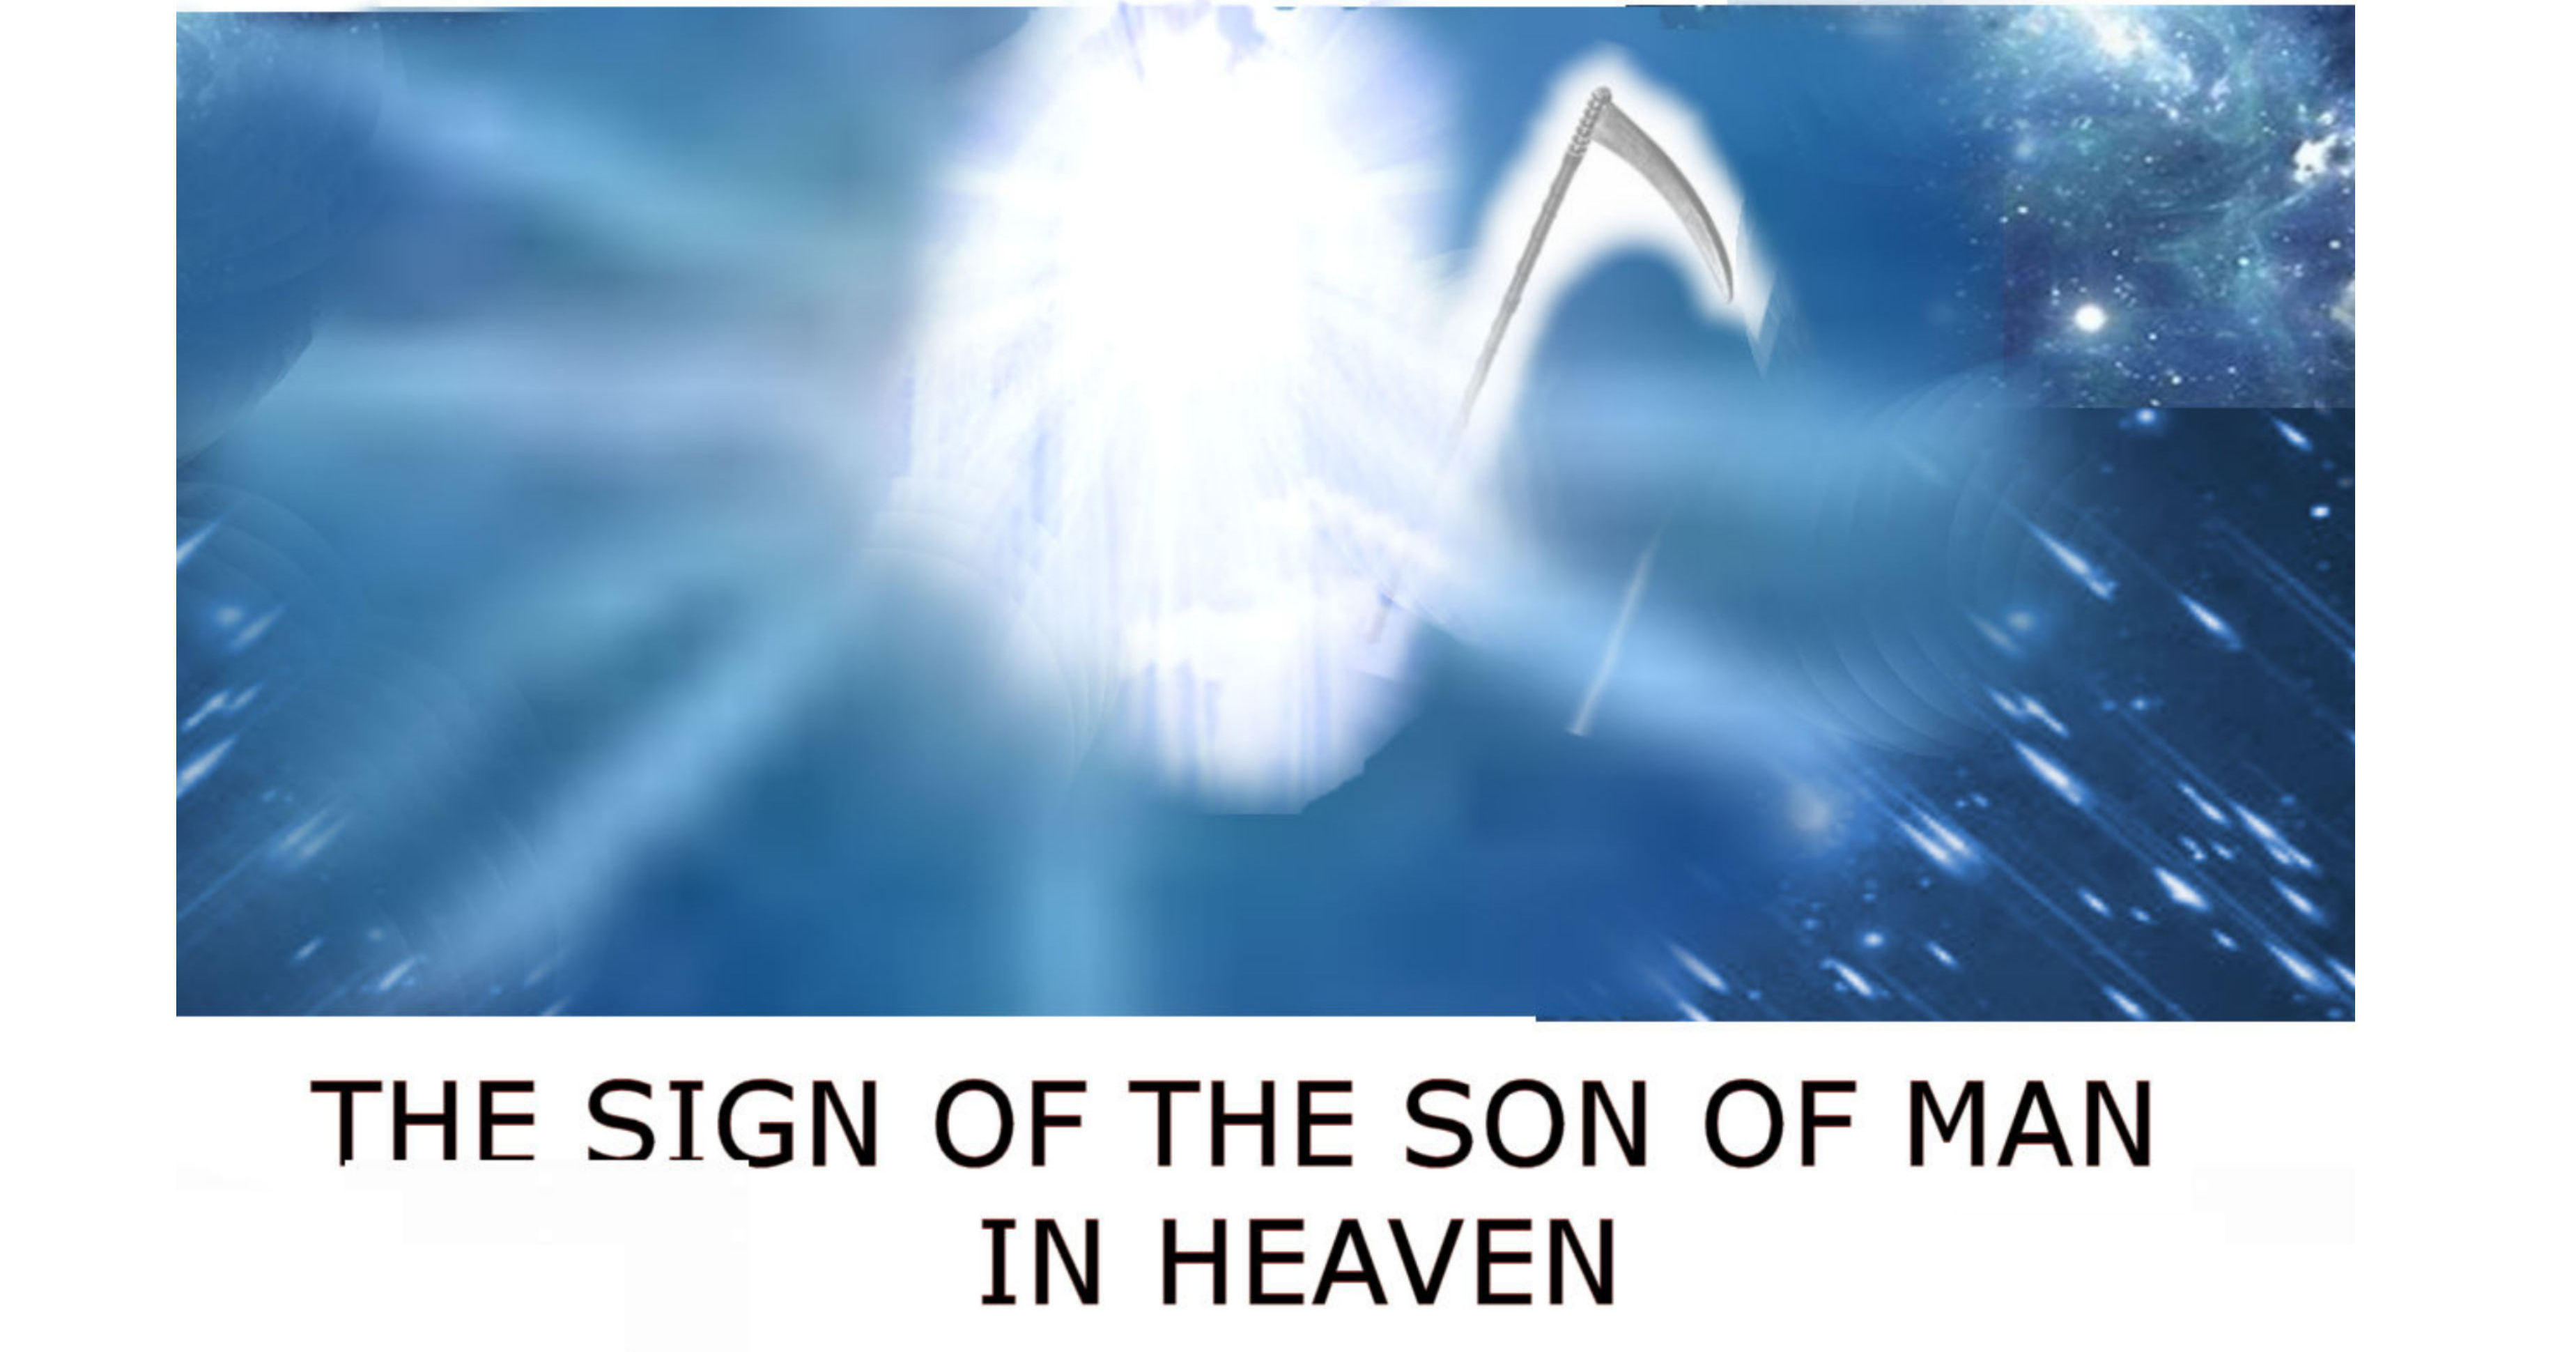 The sign of the son of man in heaven.jpg